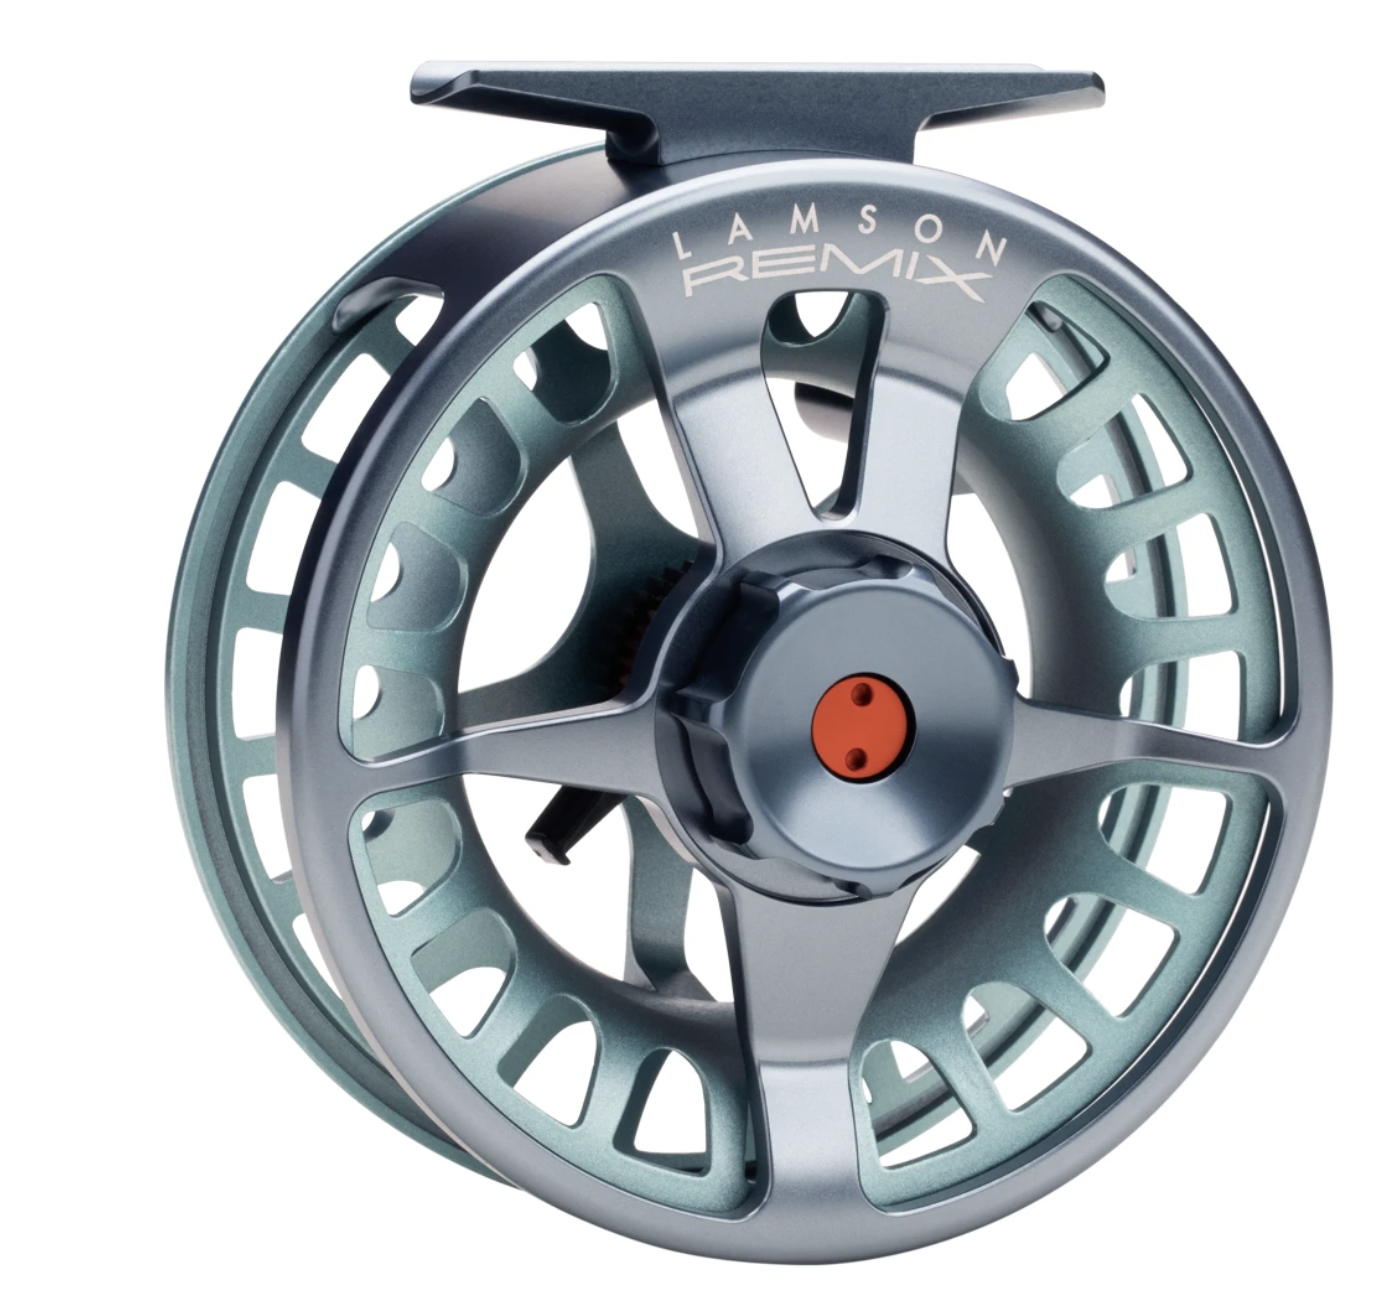 Waterworks/Lamson Remix-7+RX Fly Fishing Reel-Glacier - Andy Thornal Company